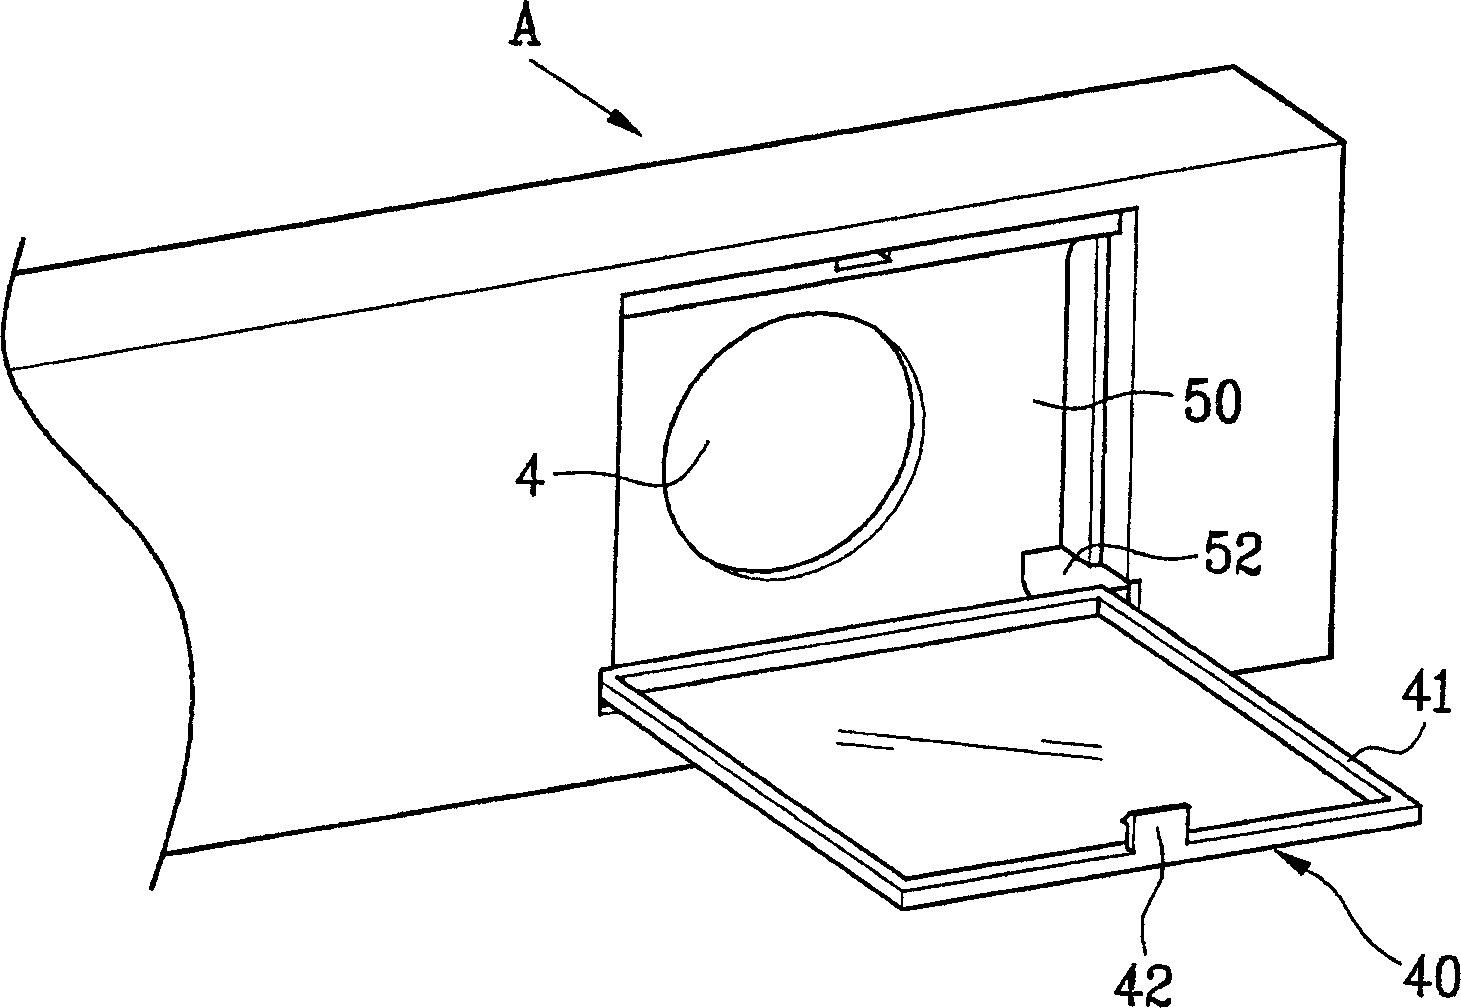 Bottom cover and drainage cover combined structure of drum washing machine